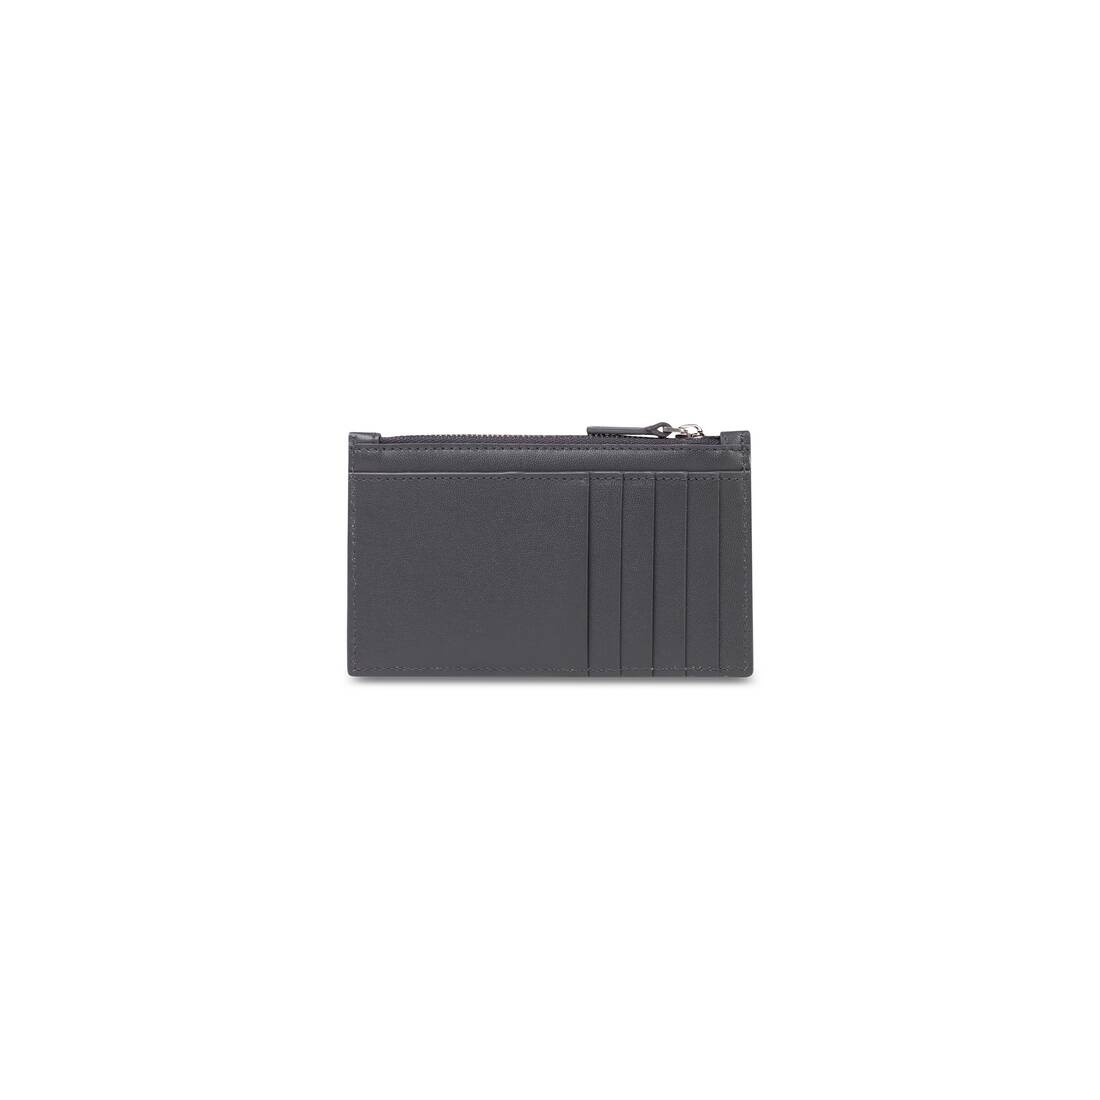 Men's Cash Large Long Coin And Card Holder in Black - 2